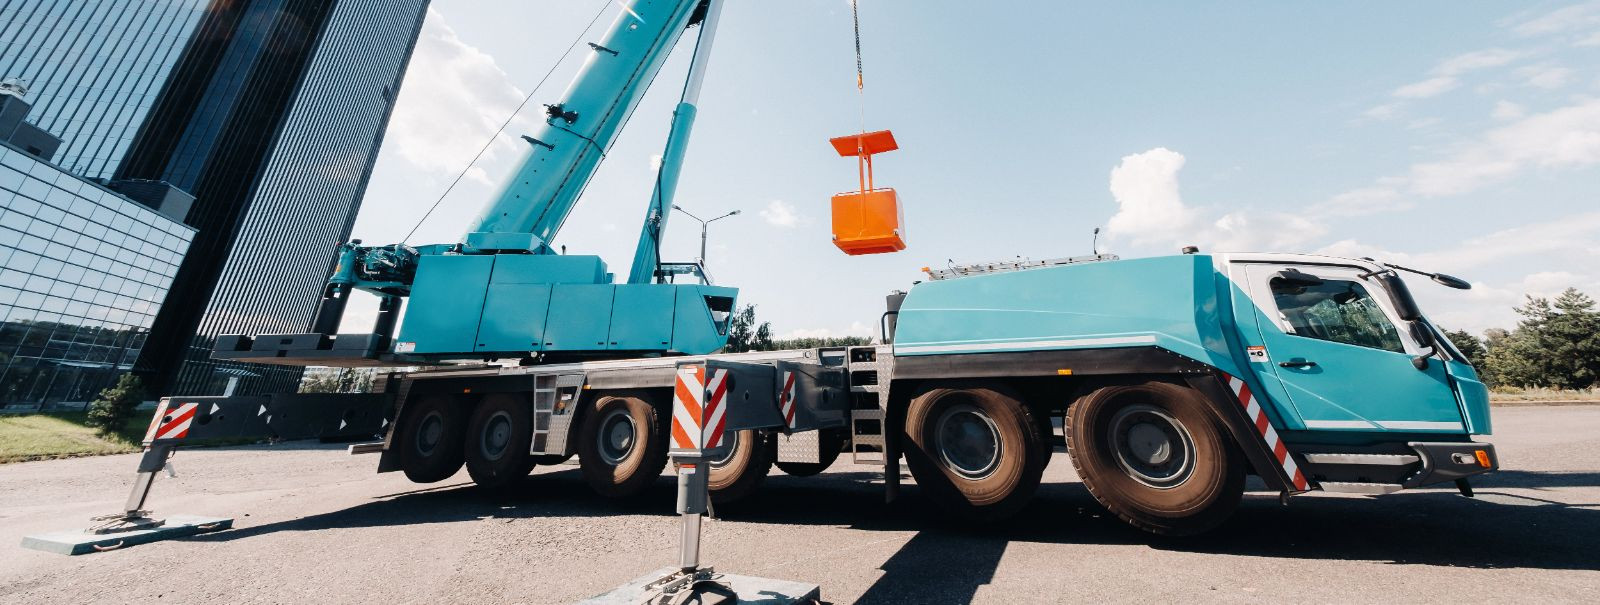 Crane car lifting is a specialized service that combines the flexibility of road transport with the heavy lifting capabilities of a crane. This synergy is cruci